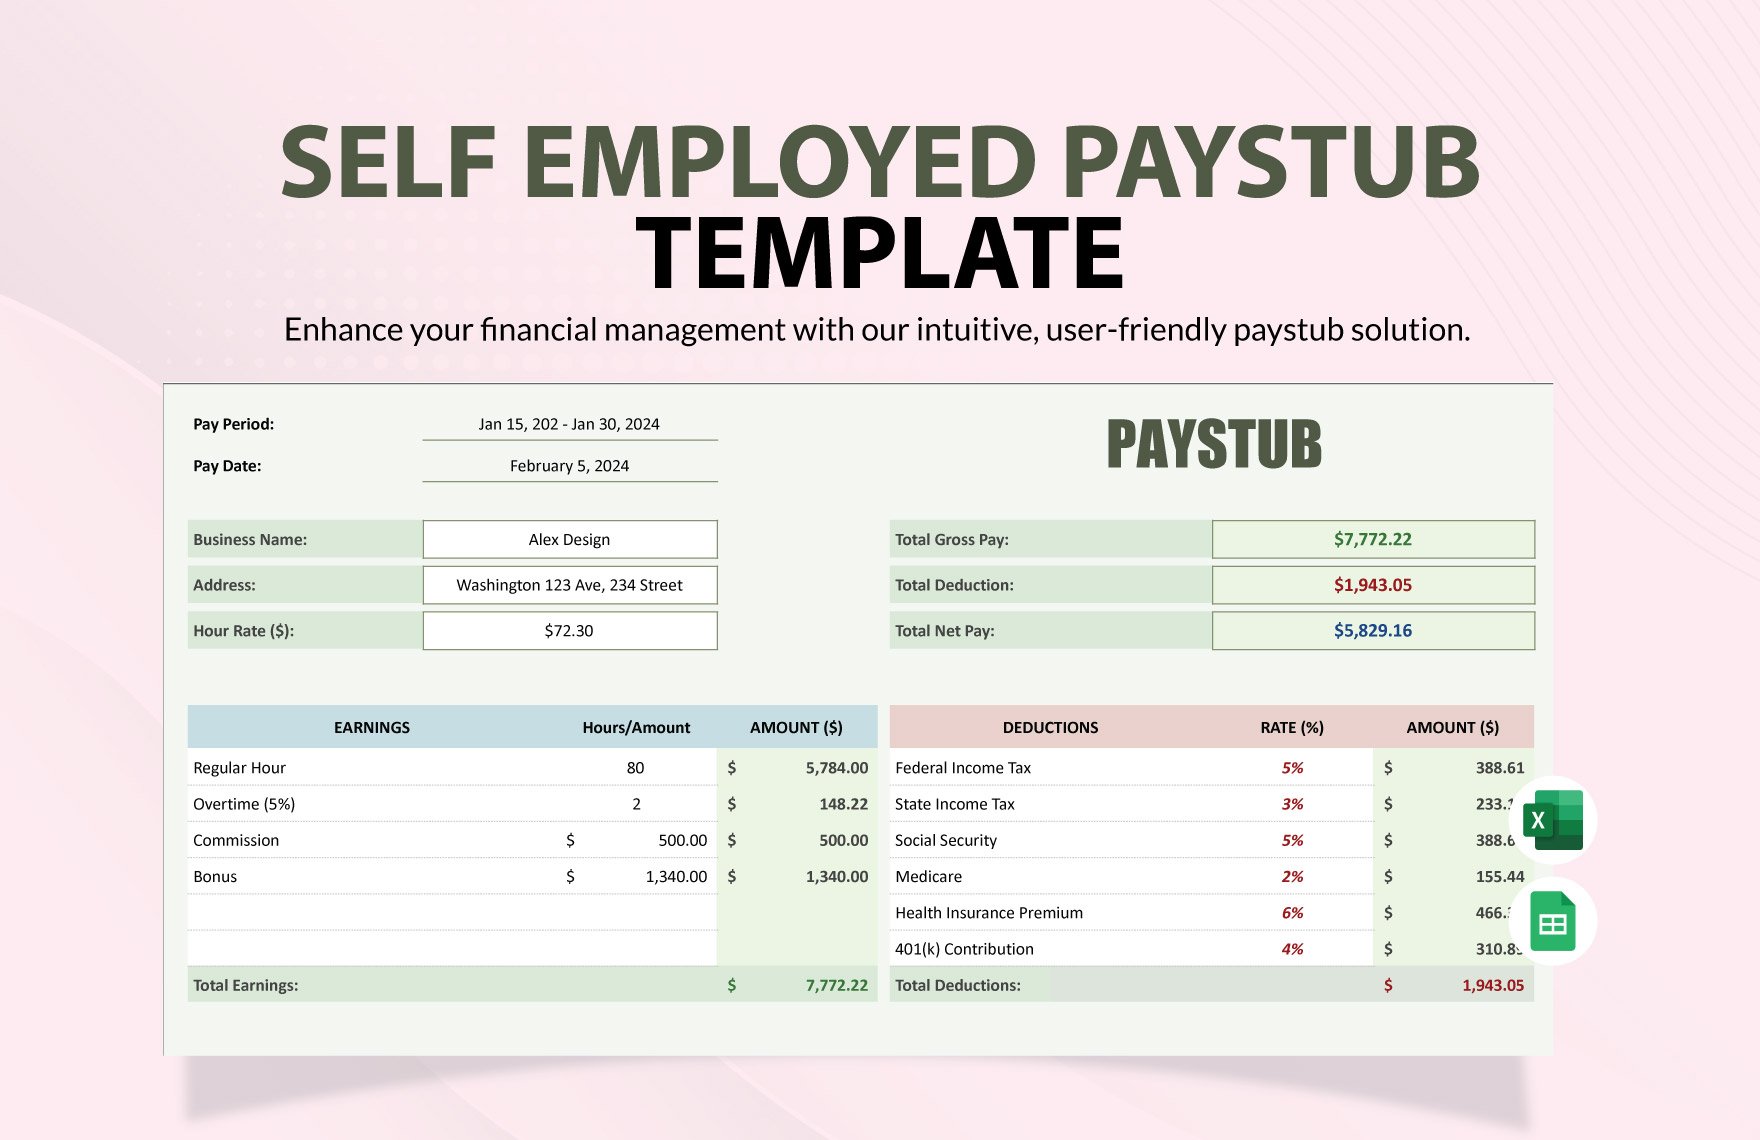 Self Employed Paystub Template in Excel, Google Sheets